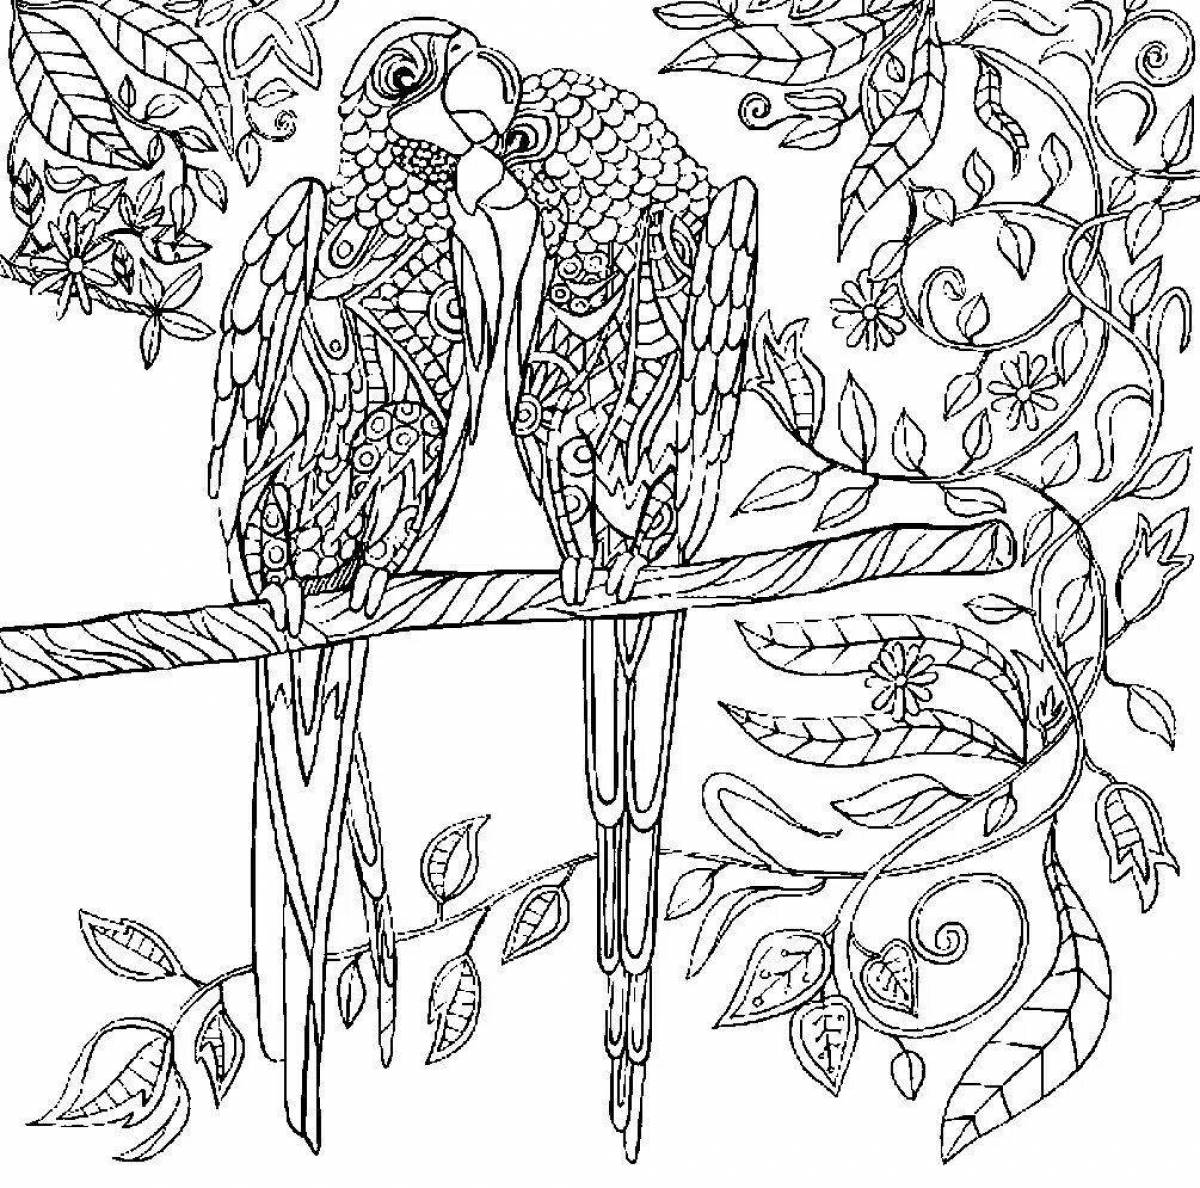 Peaceful anti-stress coloring book for adults